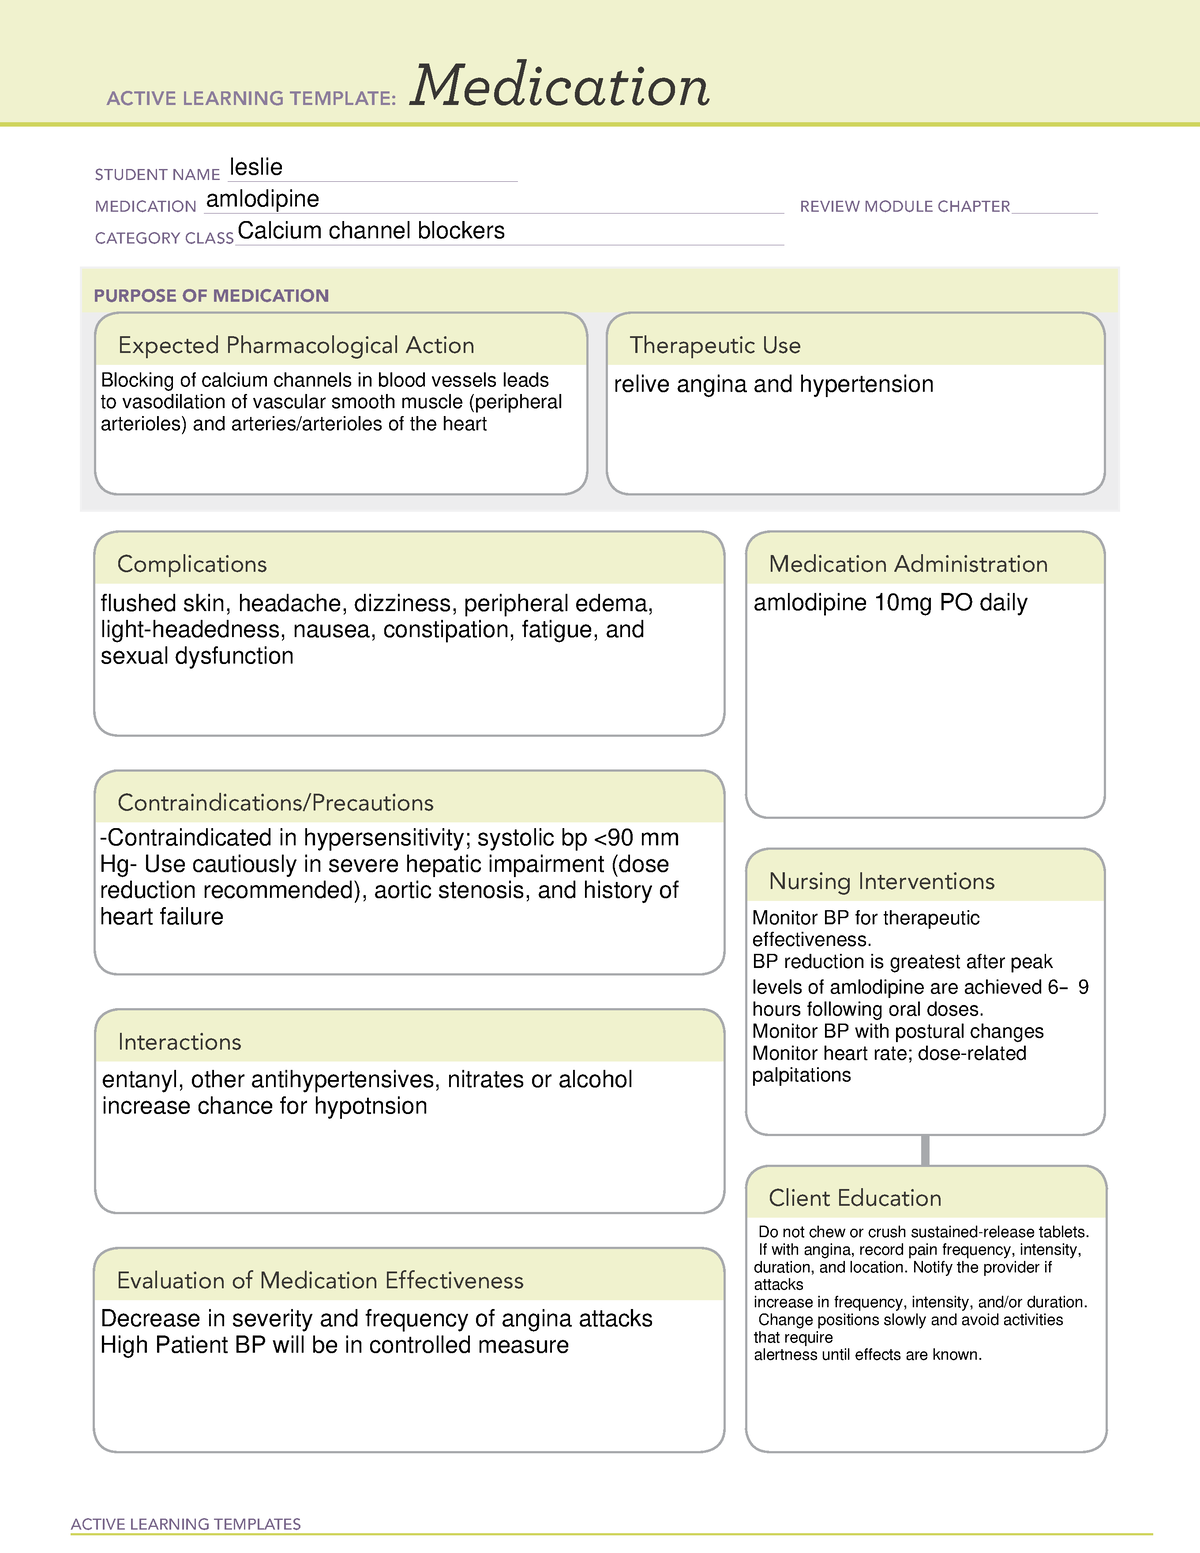 ATI Medication Template Amlodipine ACTIVE LEARNING TEMPLATES